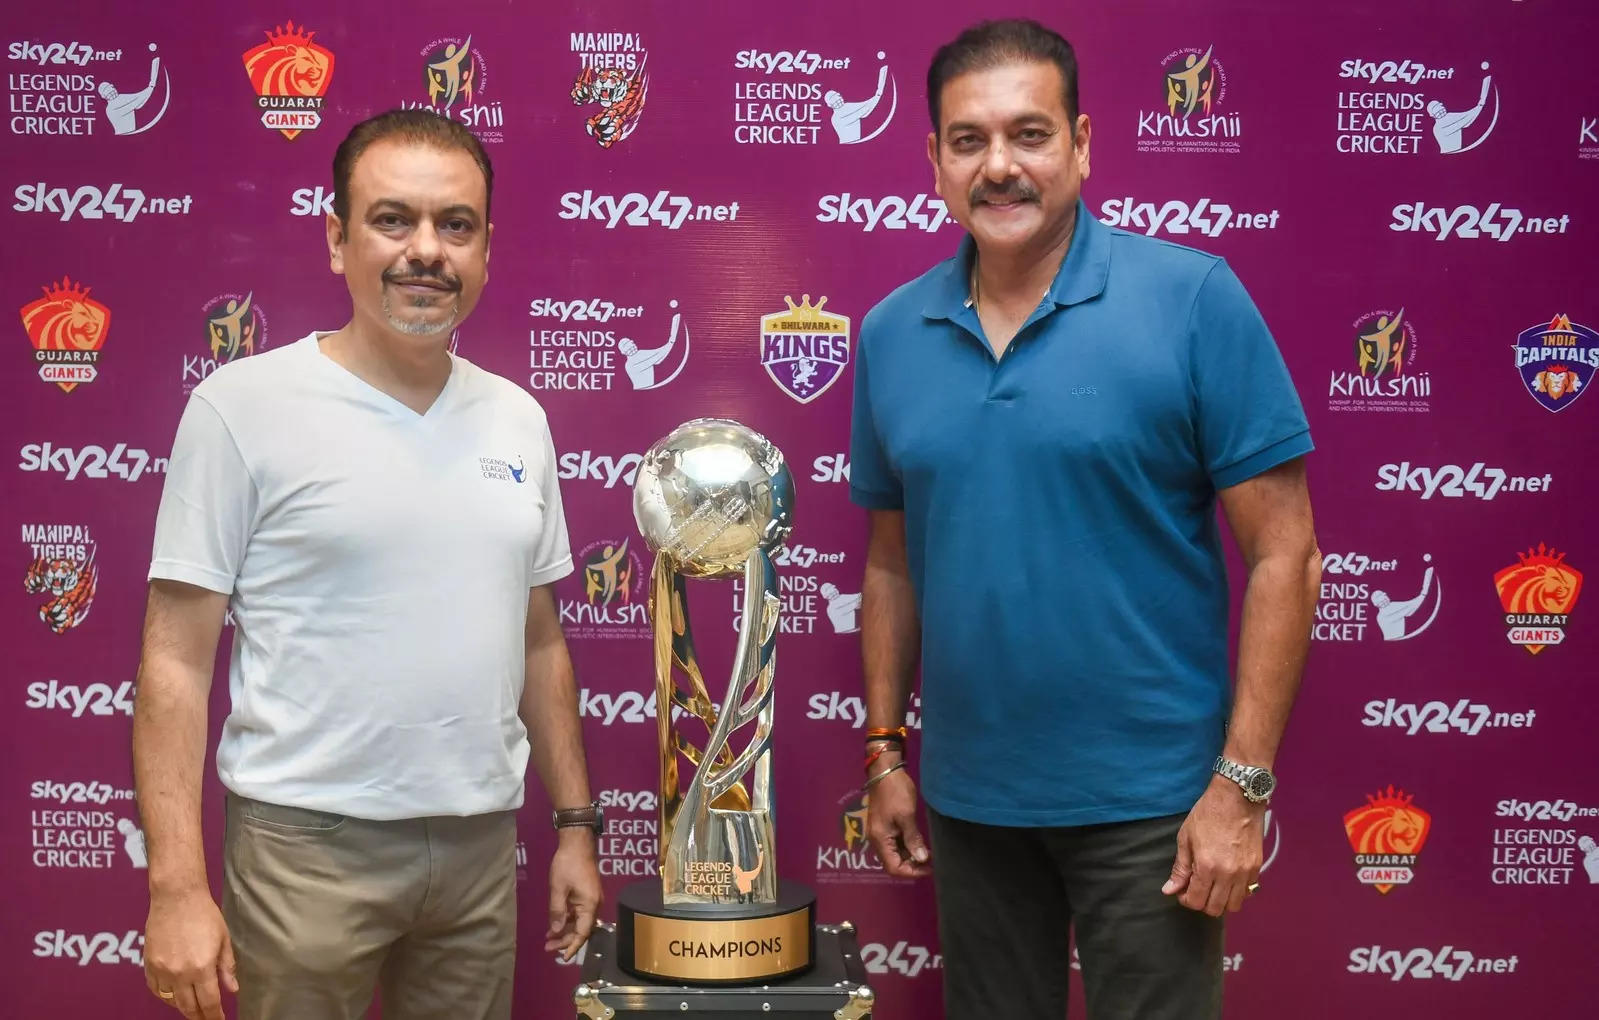 <p>Kolkata: Legends League Cricket Co-founder & CEO Raman Raheja and former cricketer & Legends League Cricket Commissioner Ravi Shastri pose with the tournament's trophy, in Kolkata. (PTI Photo)(</p>